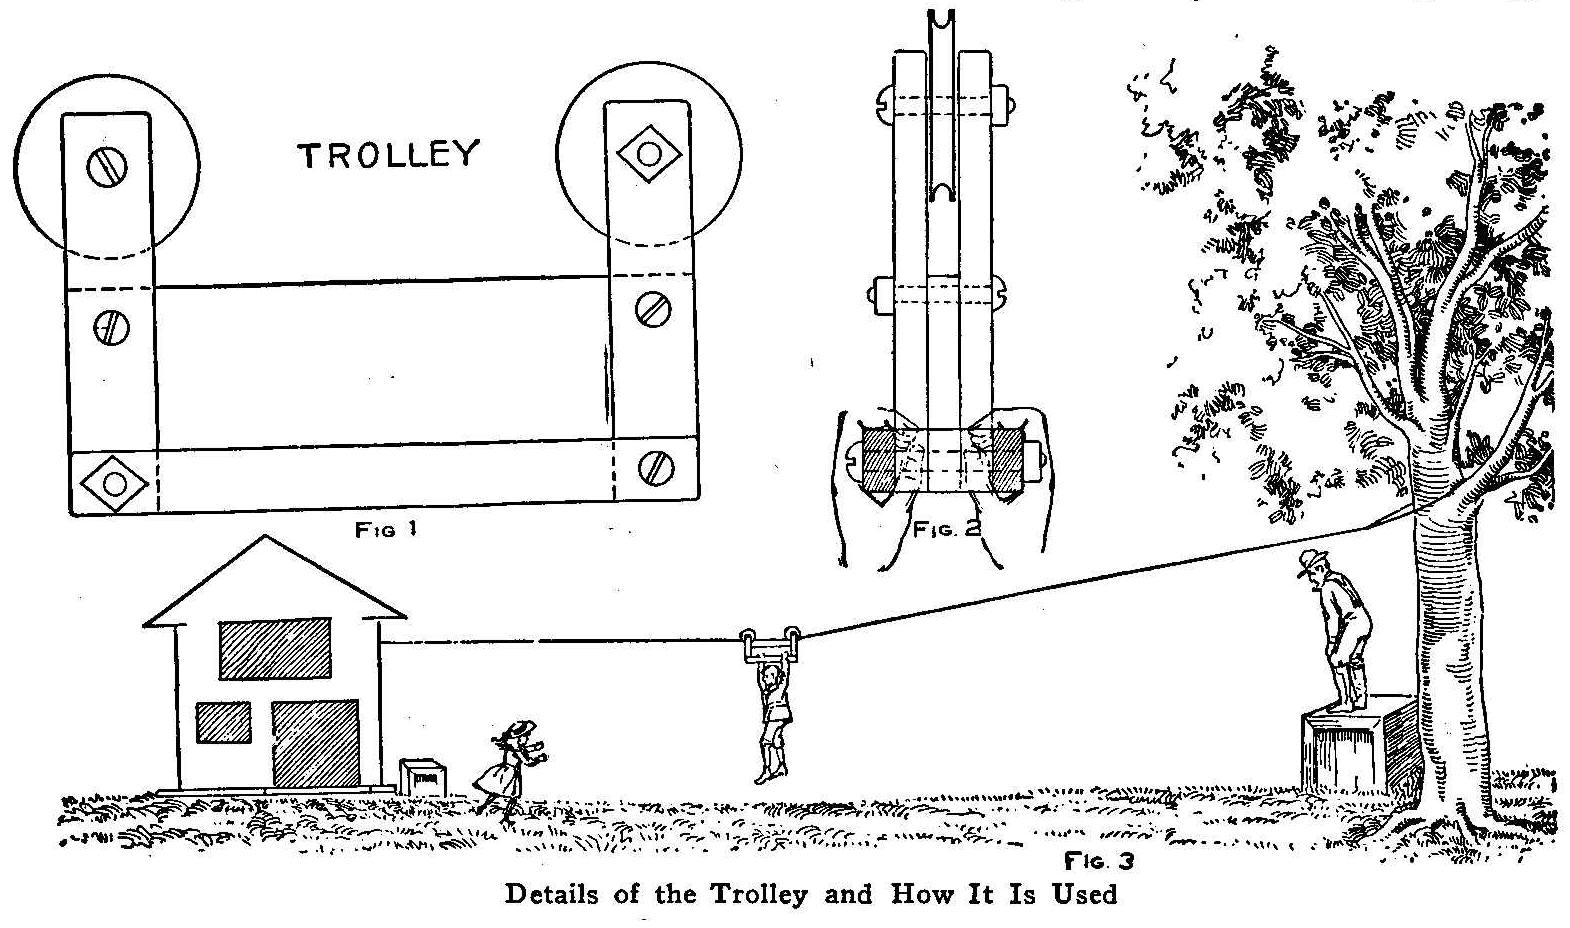 Details of the Trolley and How It Is Used 